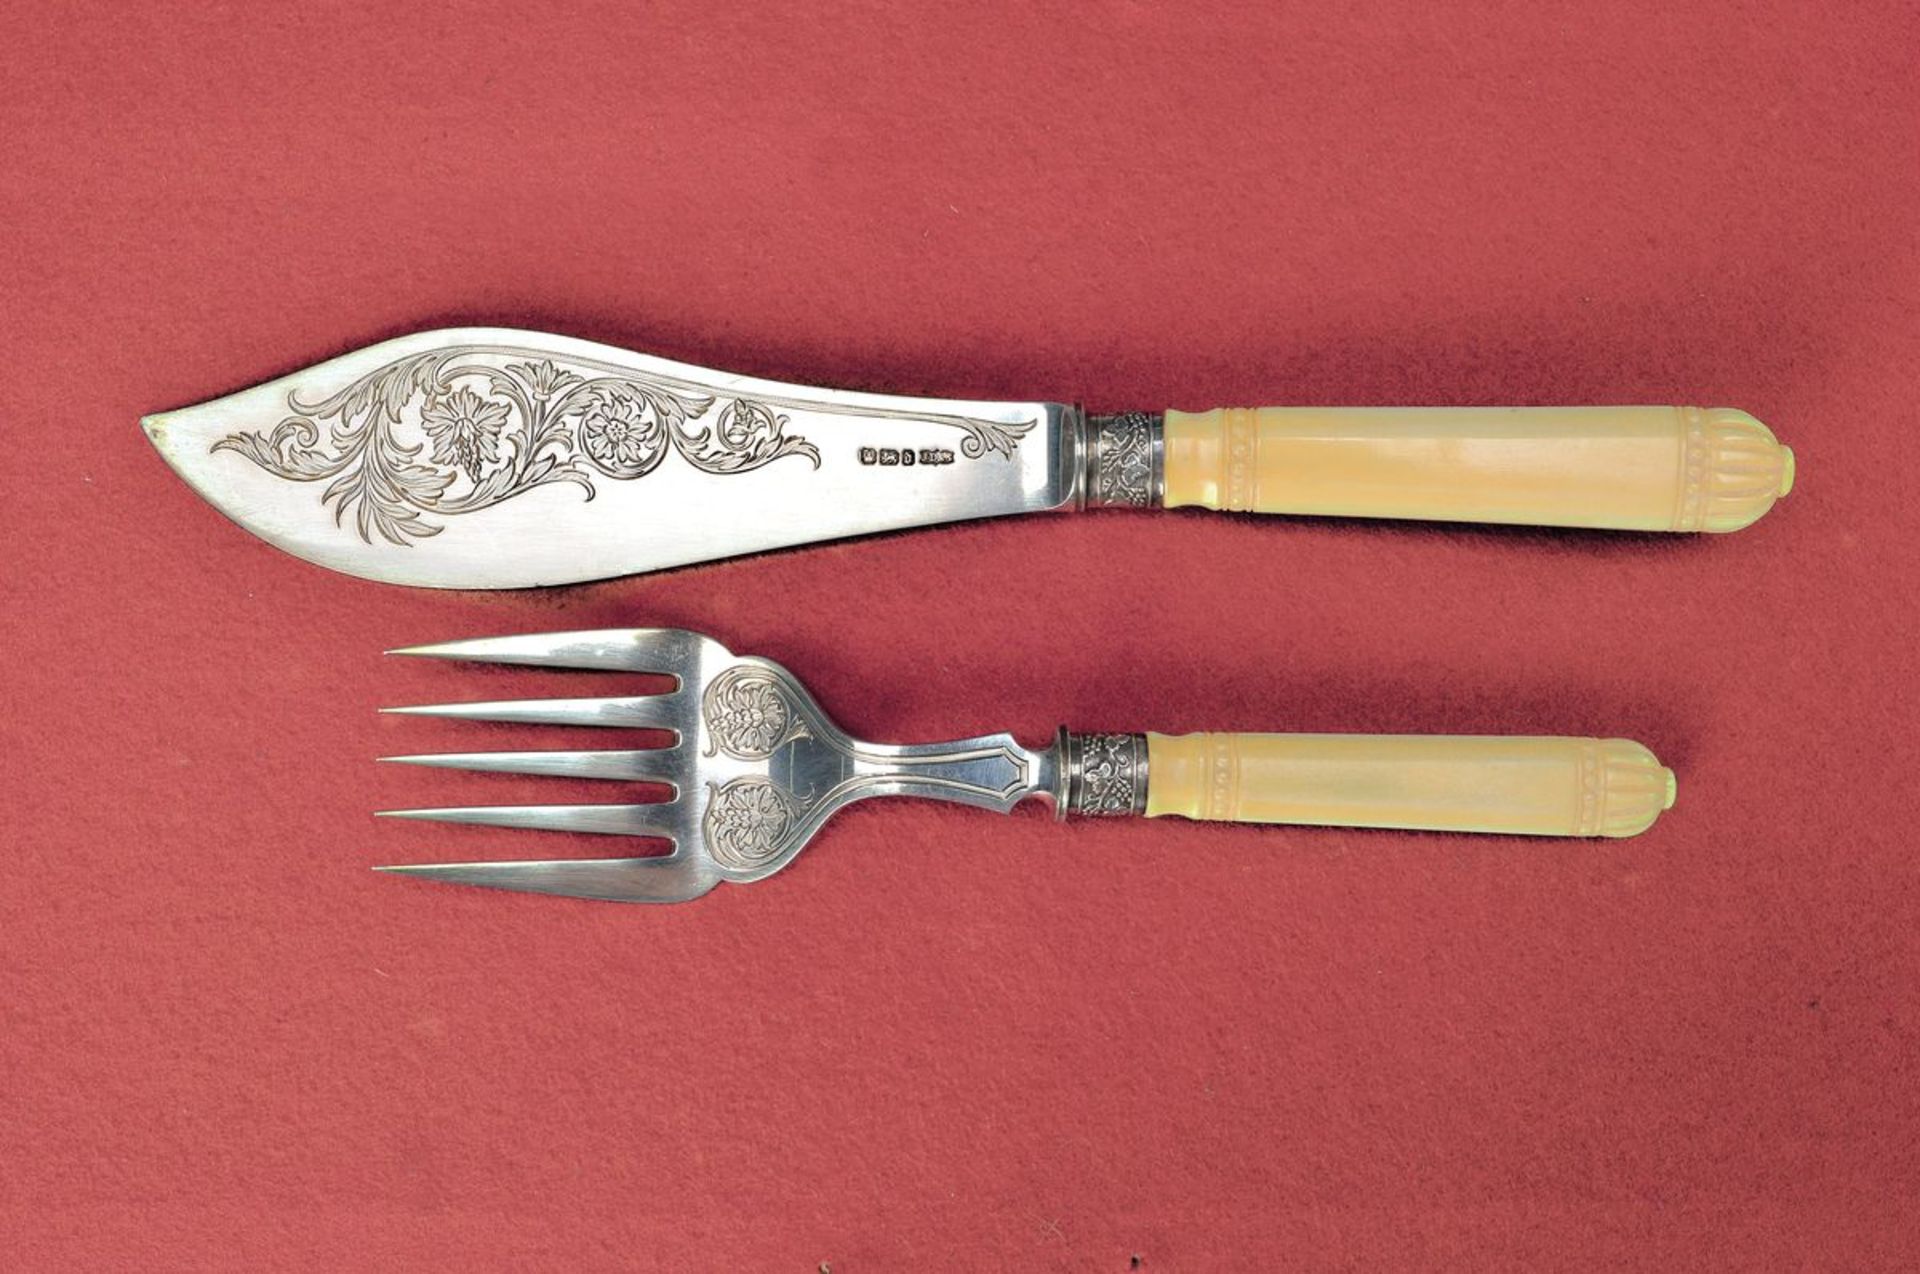 serving cutlery, Birmingham, around 1870-80, Sterling silver, opulent engraved, heavy quality, ivory